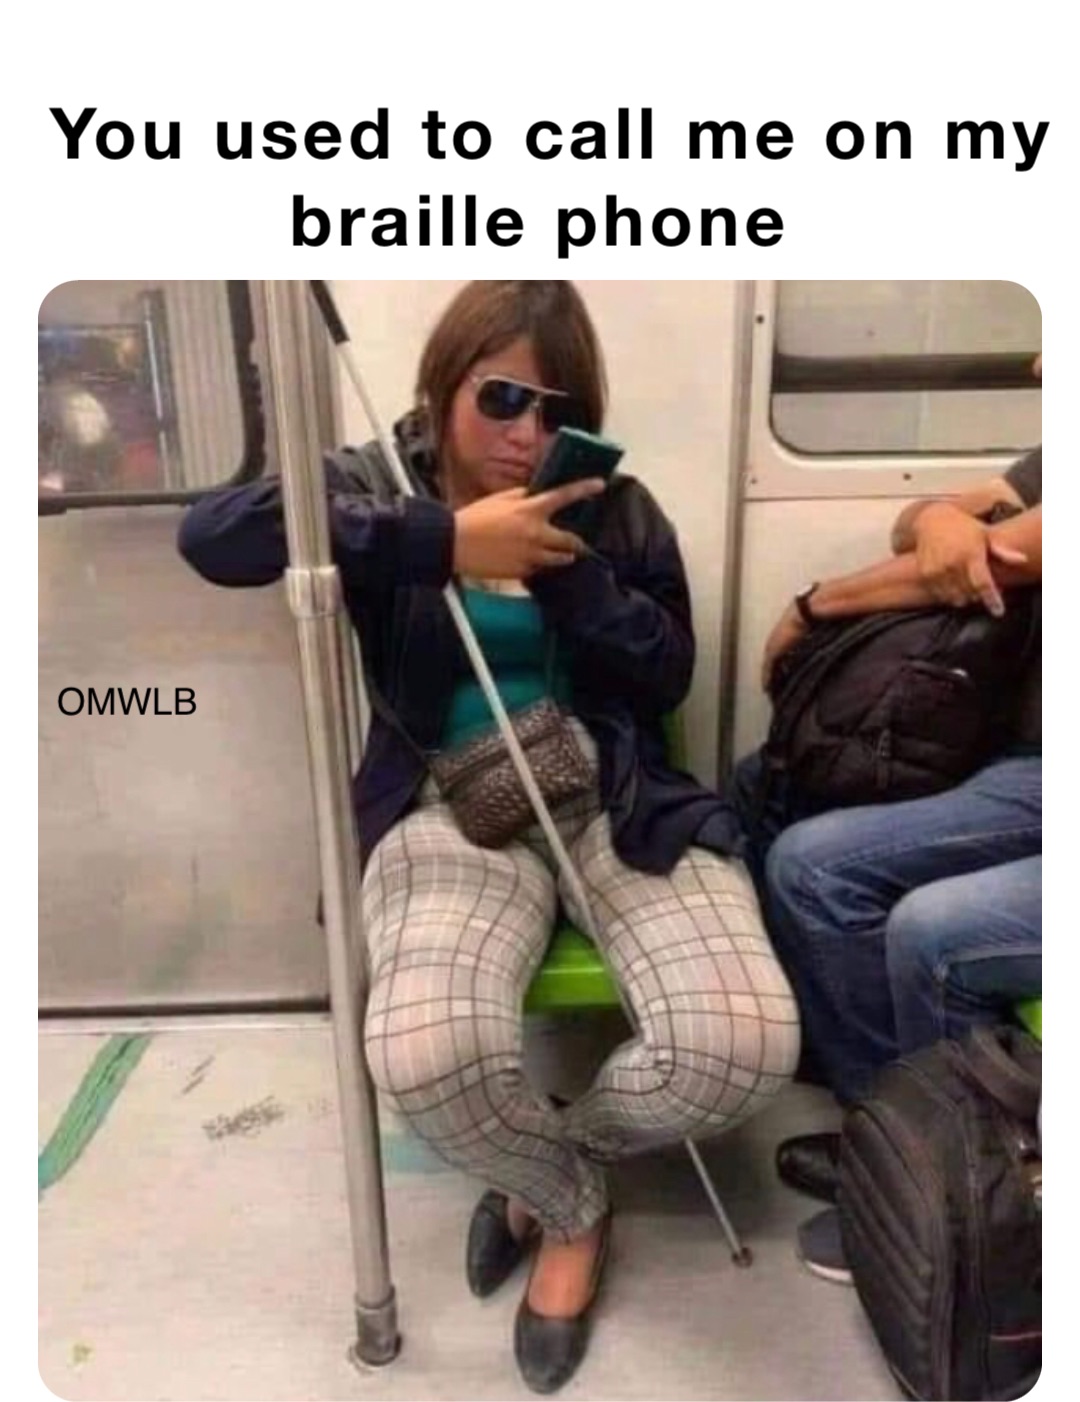 You used to call me on my braille phone